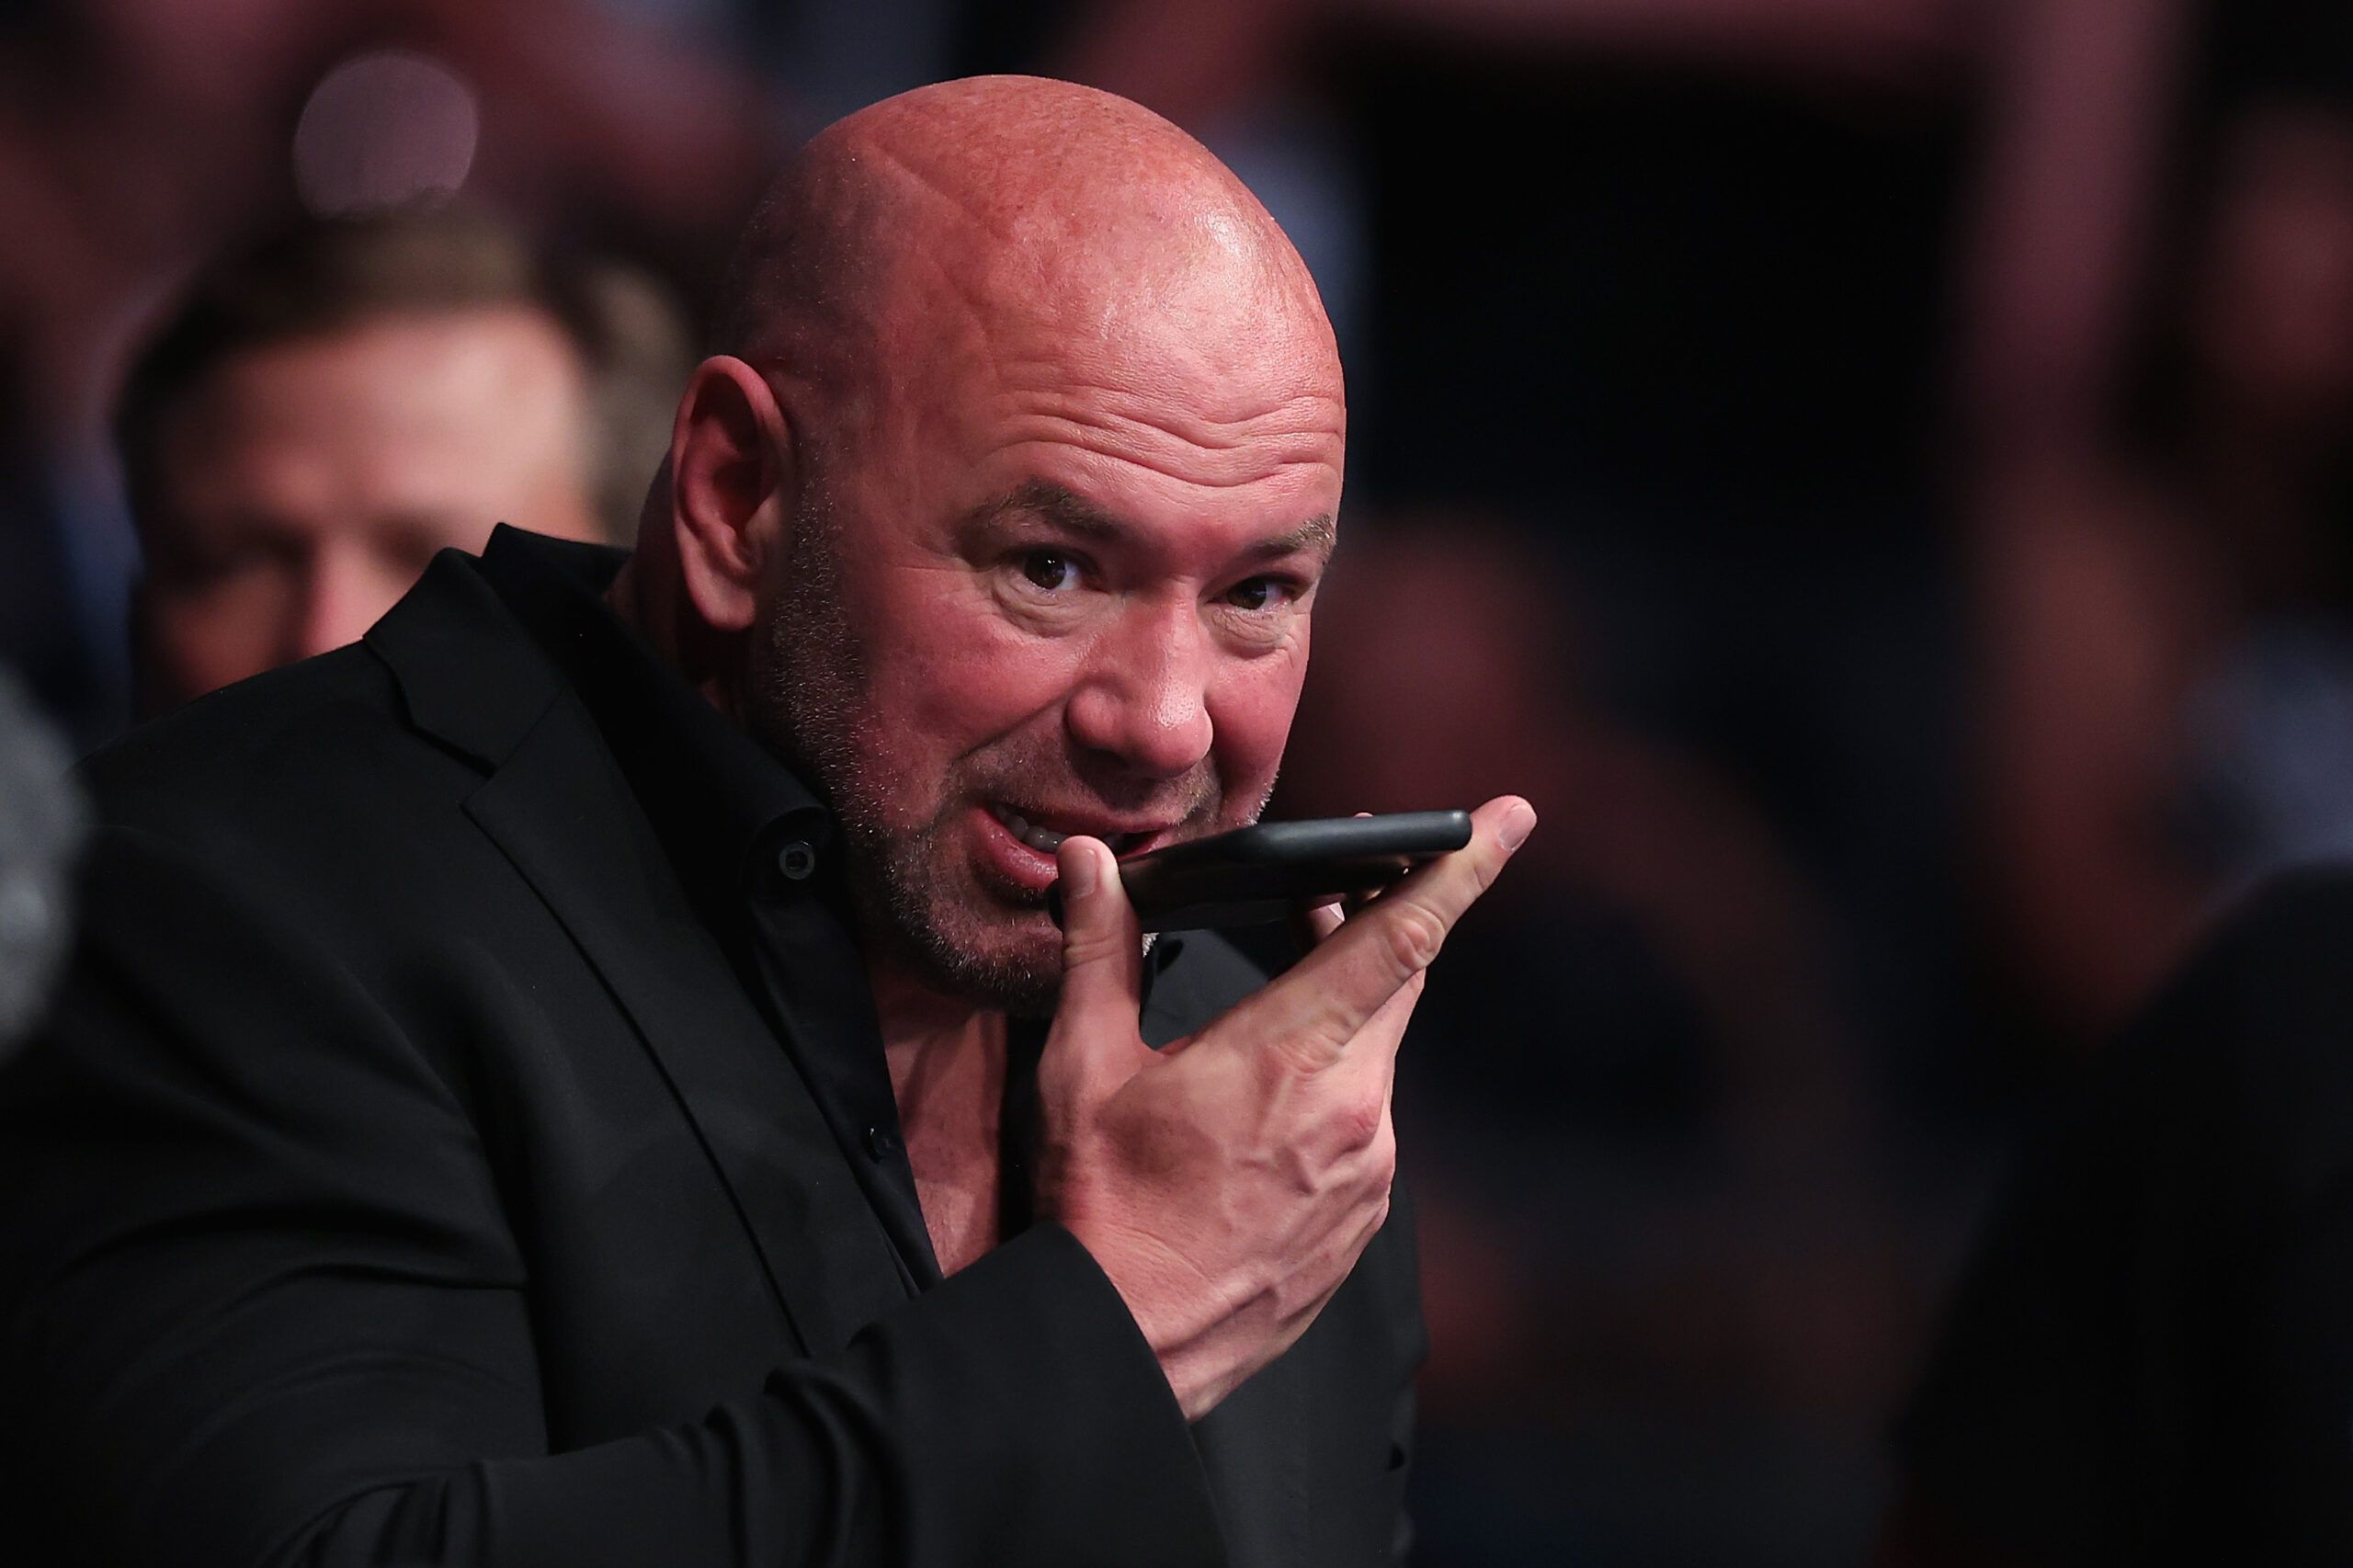 Dana White is the president of the UFC